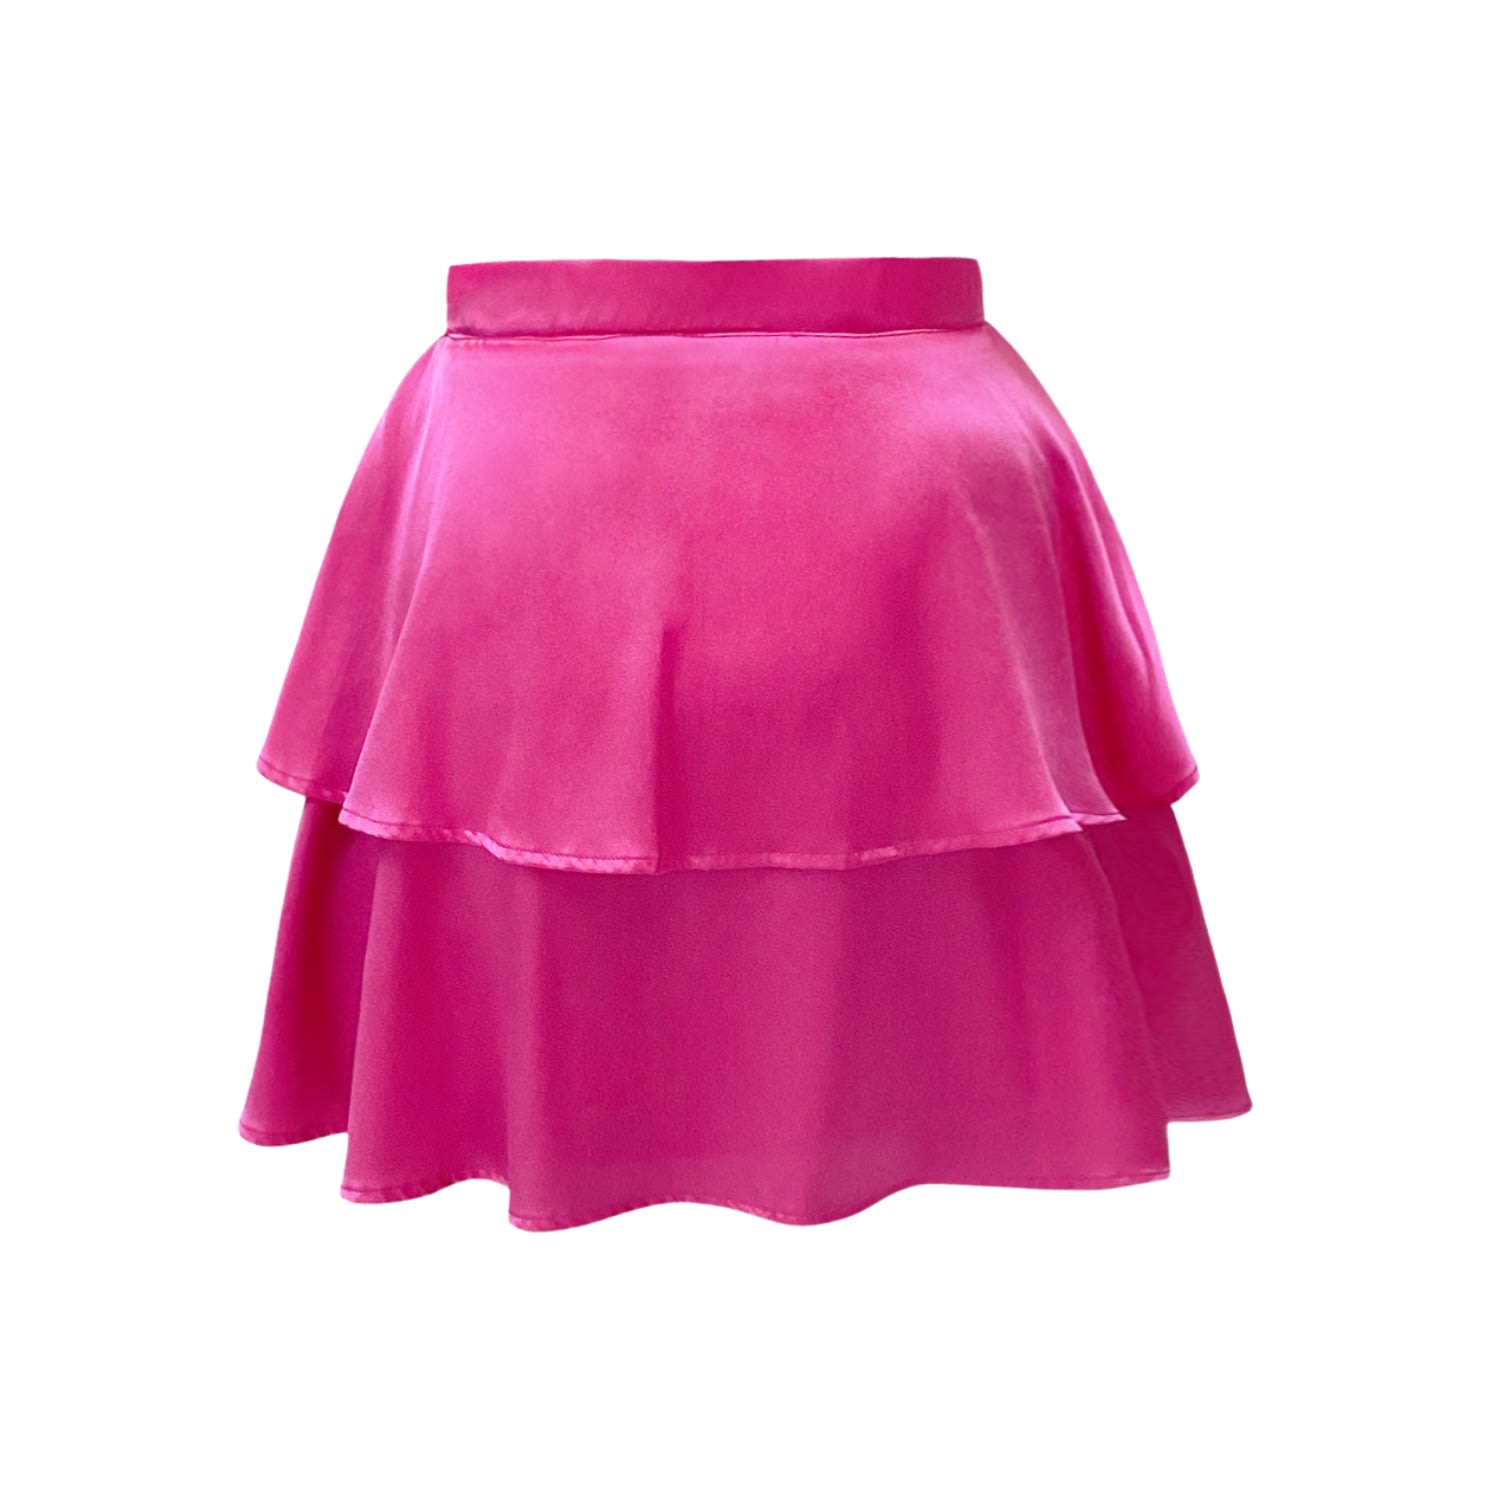 Ow Collection Women's Pink / Purple Eloise Pink Mini Skirt